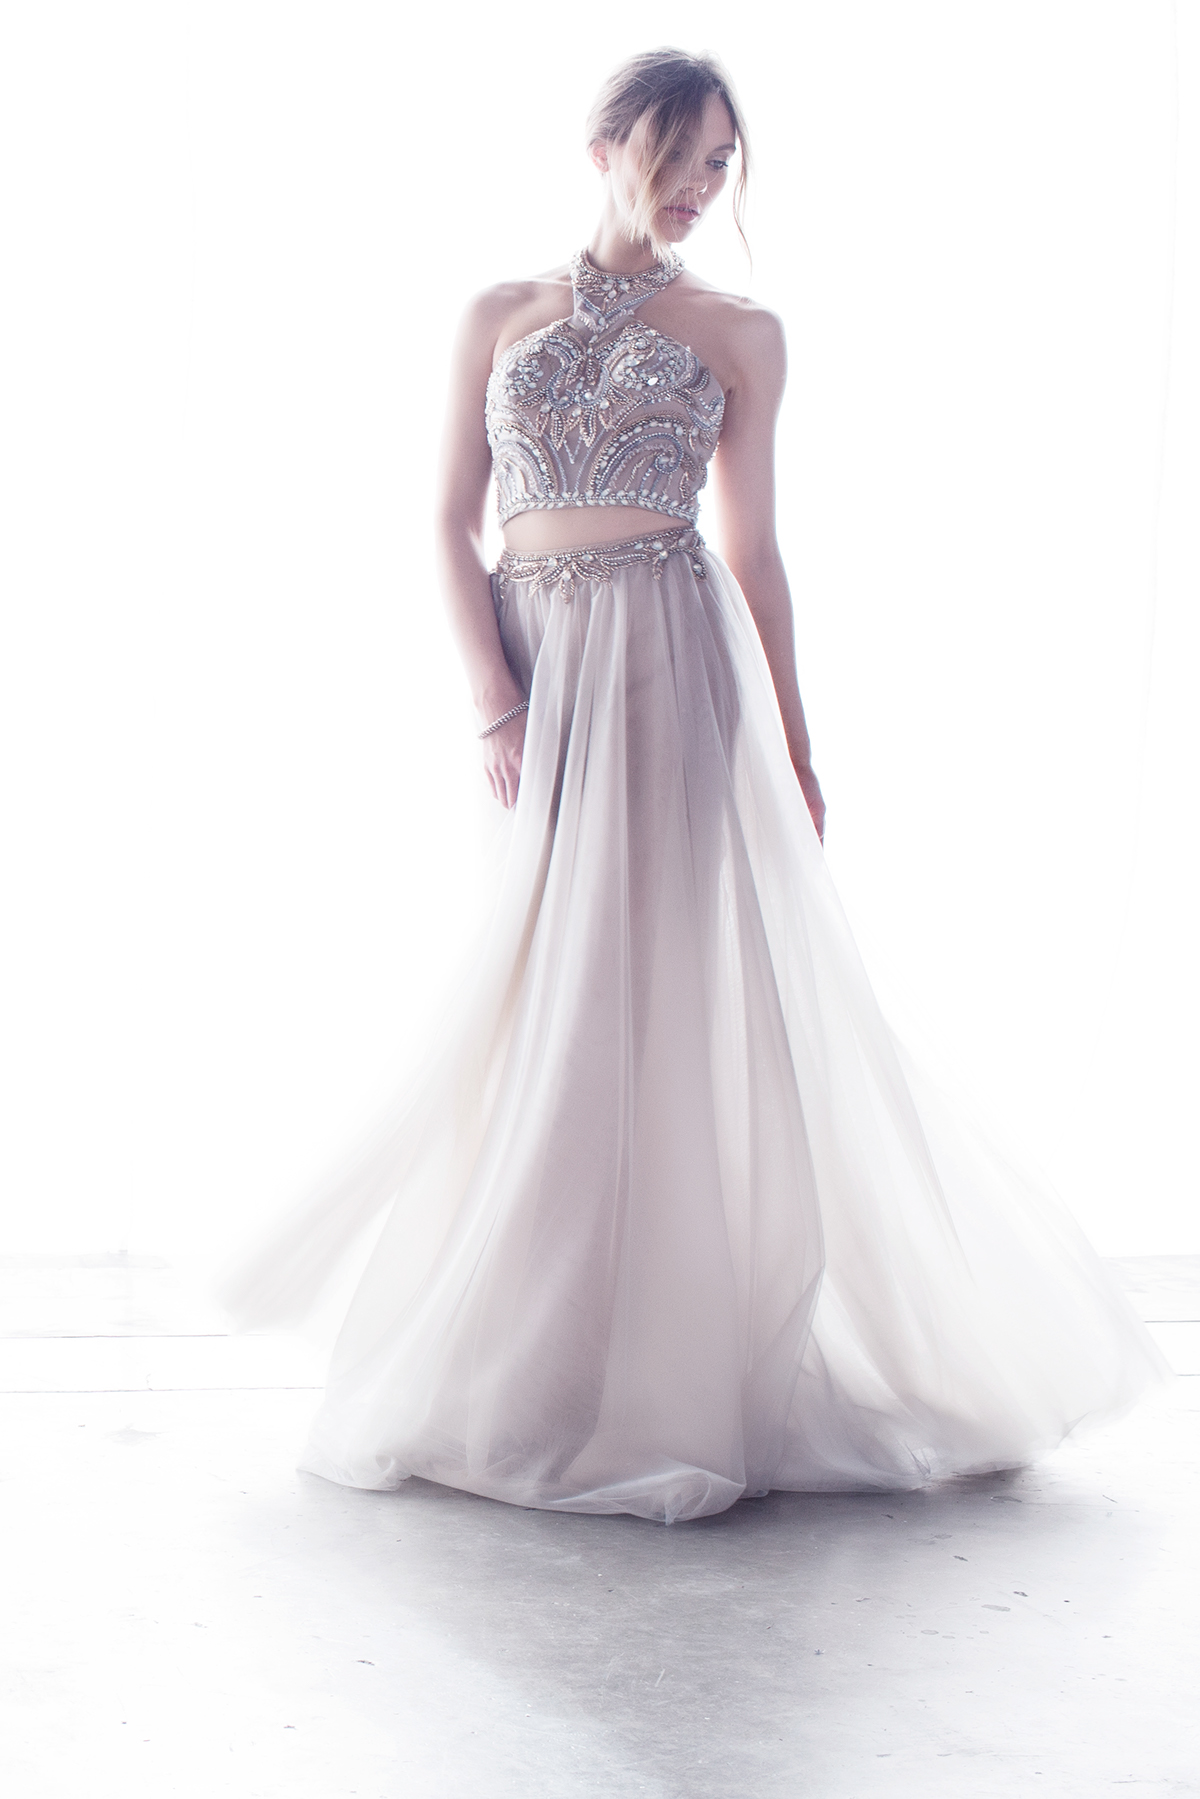 prom evening gown beauty backlit terani couture Style couture gown photographer hautelook